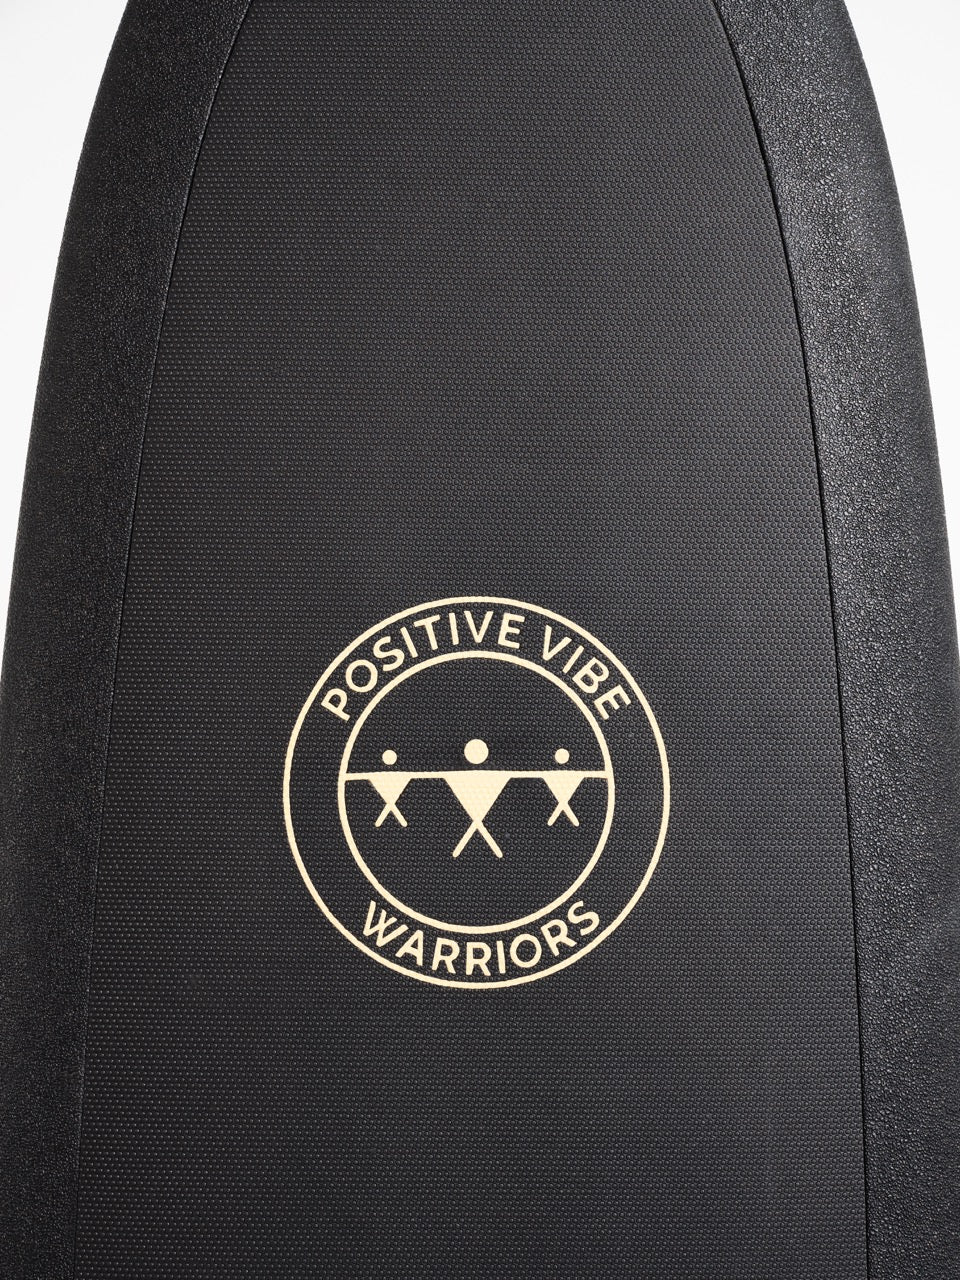 The front wax free deck pad of a black 8 foot Positive Vibe Warriors Scout surfboard with a logo on a white background